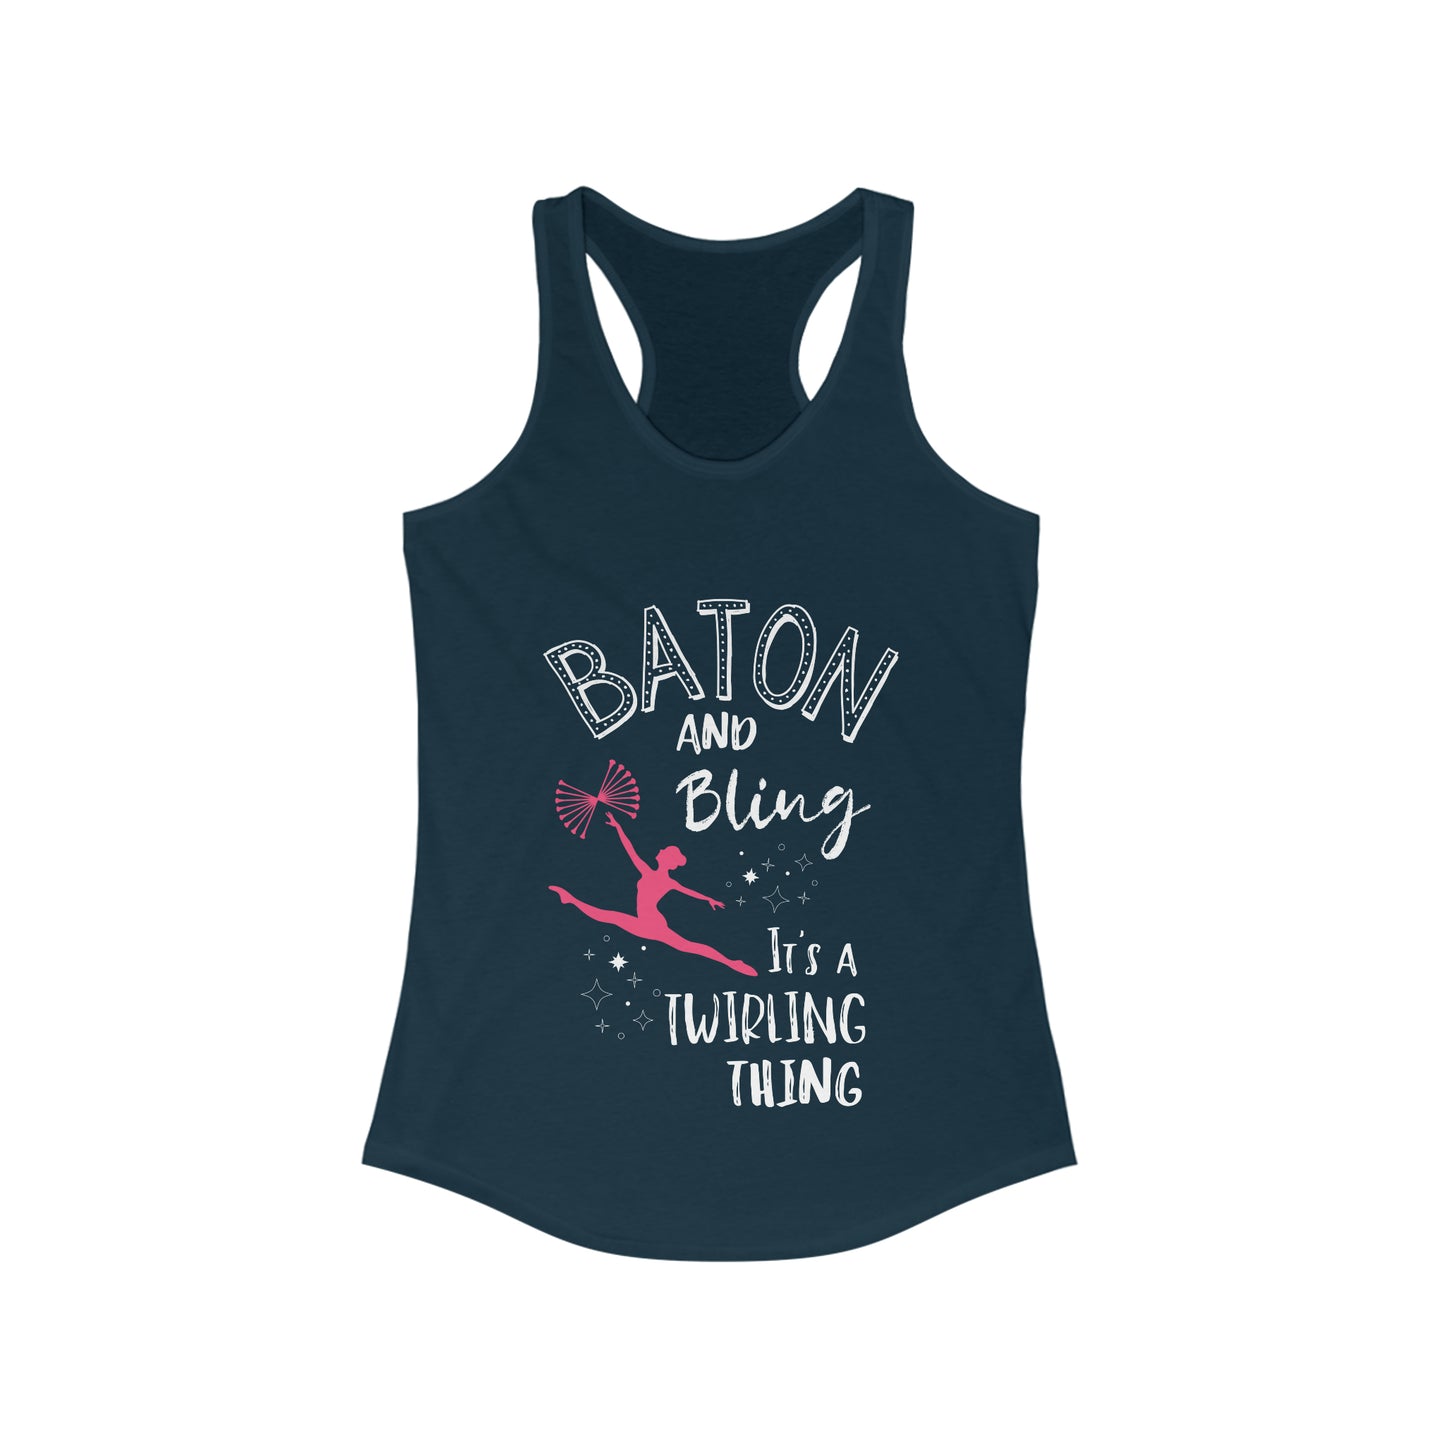 Baton and Bling It's a Twirling Thing Women's Ideal Racerback Tank